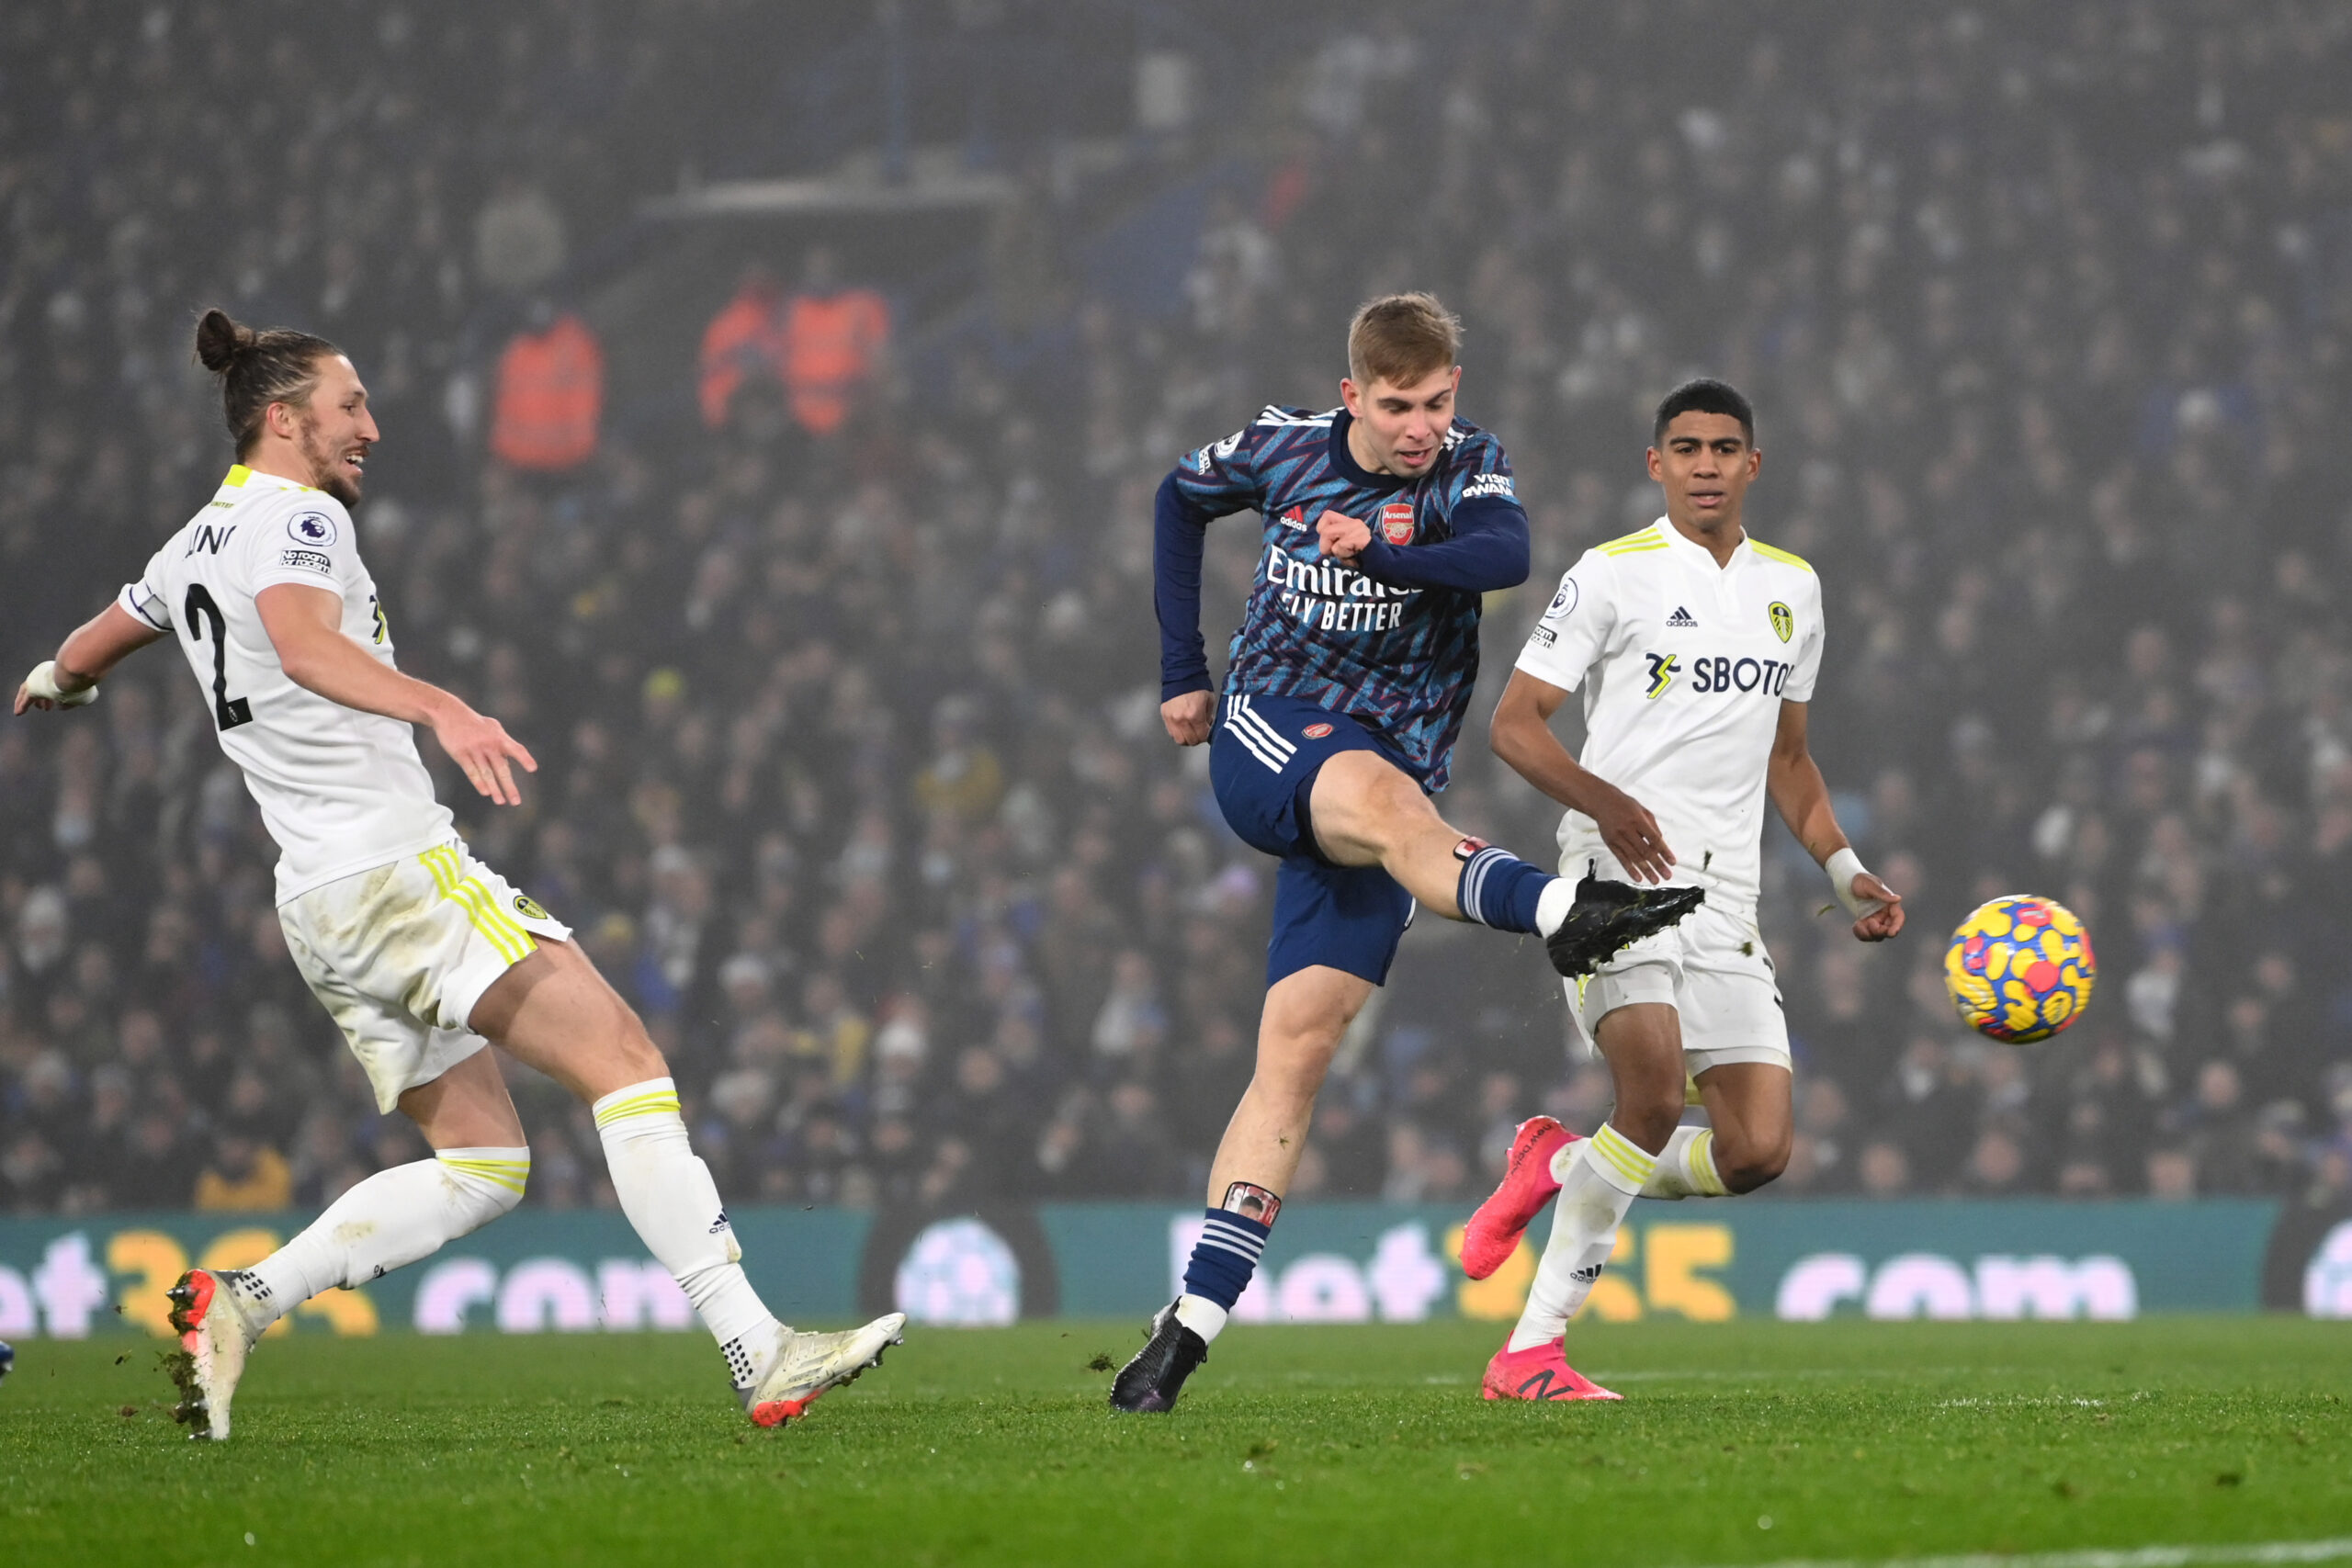 Arsenal vs Leeds United LIVE: Arsenal seek 3 IMPORTANT points for their Top-4 bid as Leeds hope to survive relegation, Follow Arsenal vs Leeds LIVE: Team News, Predictions, Live Streaming